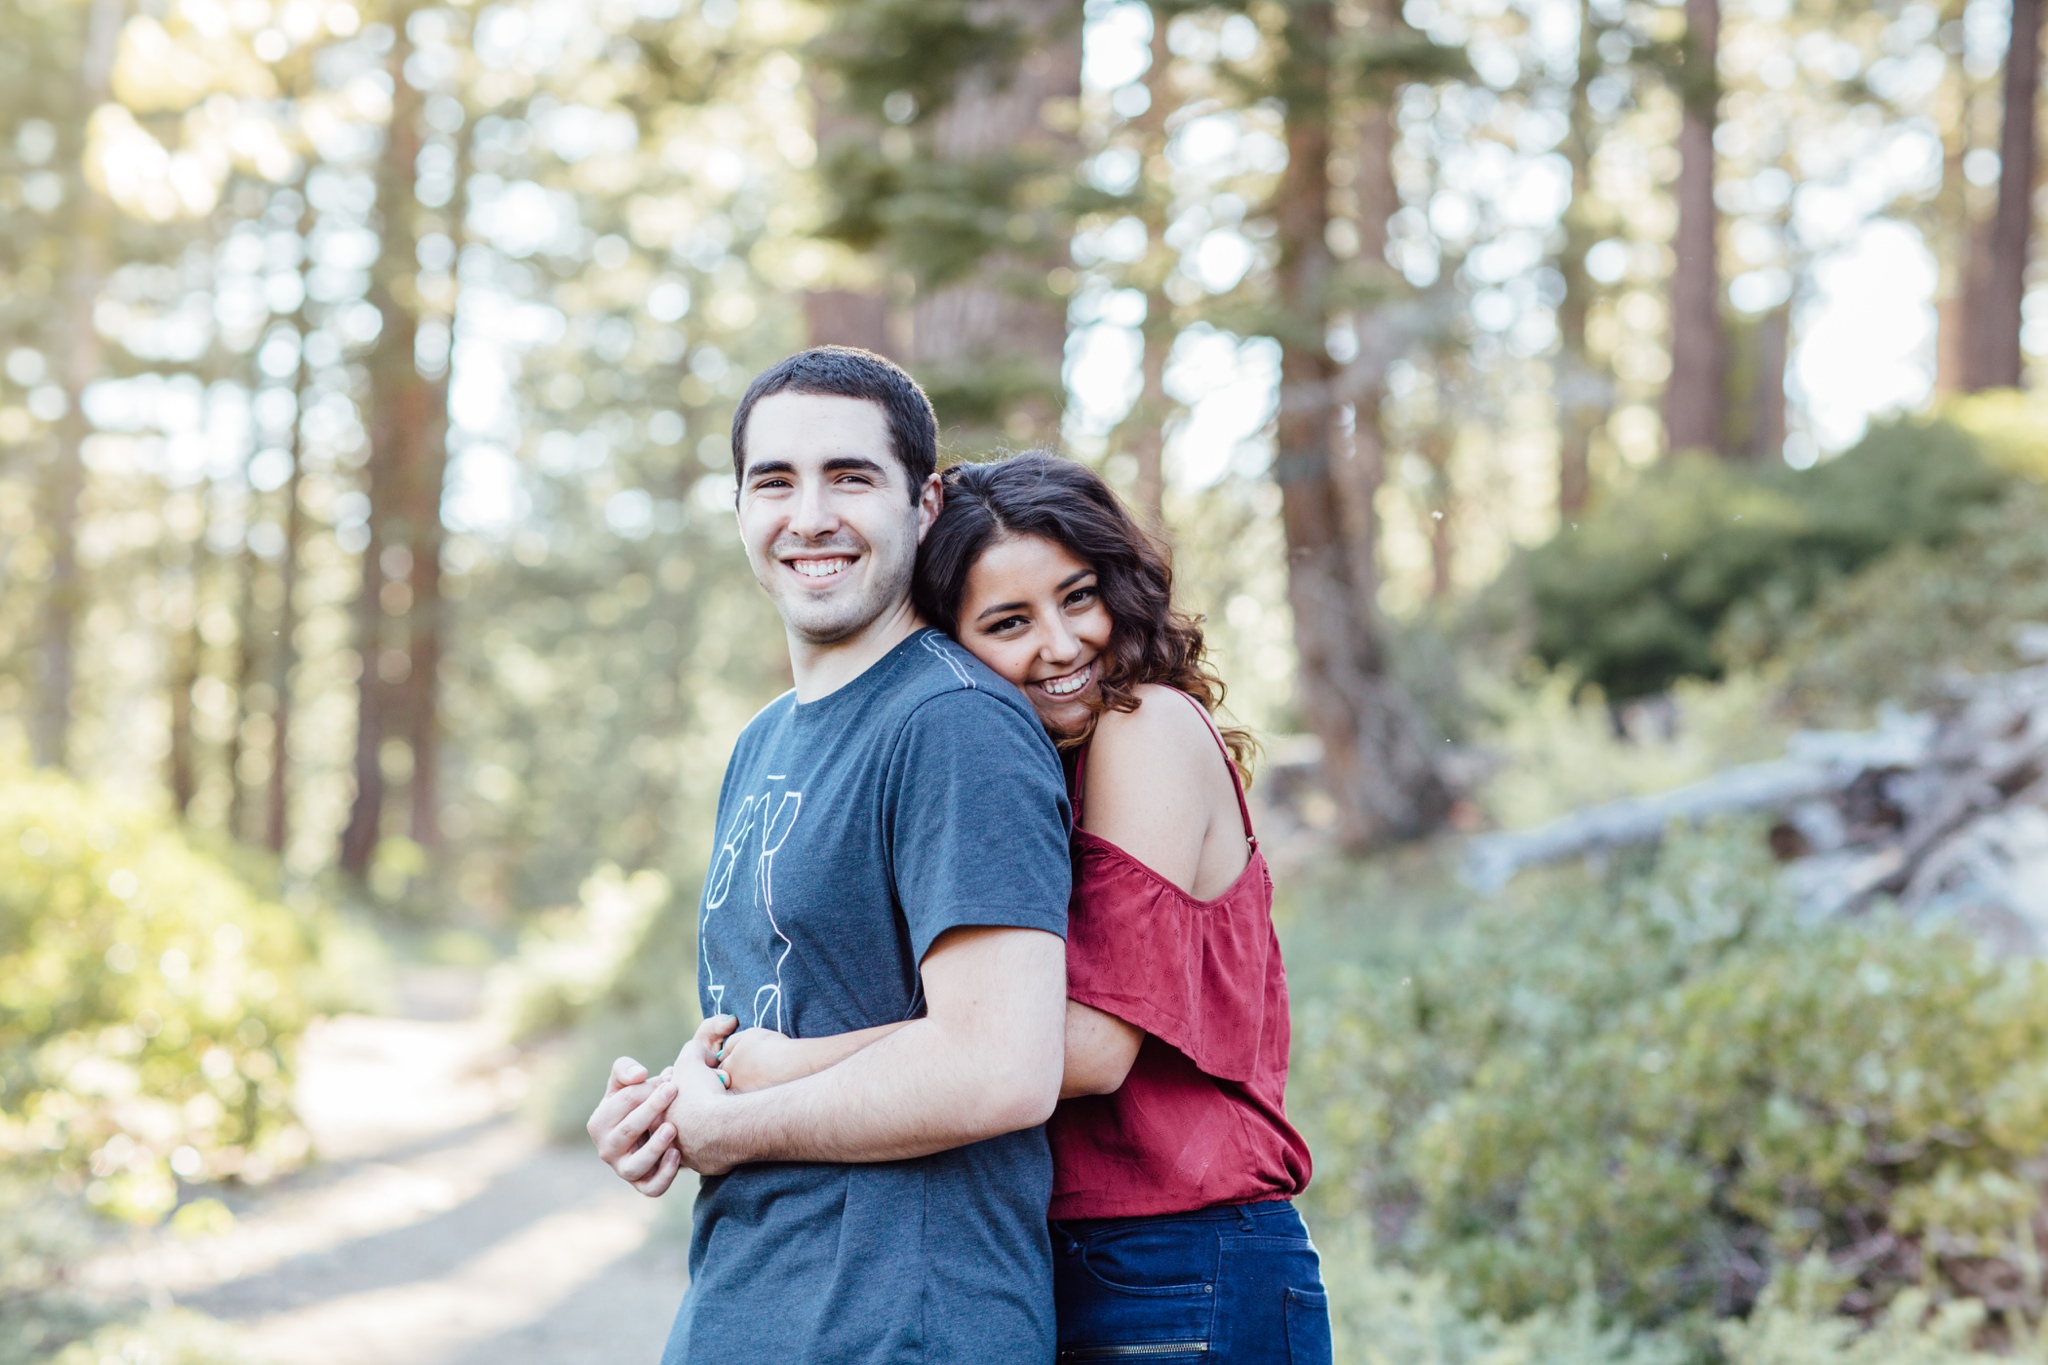 thedelauras_ostaraphotography_laketahoeengagement_laketahoeweddingphotograph_laketahoe_photographer_007